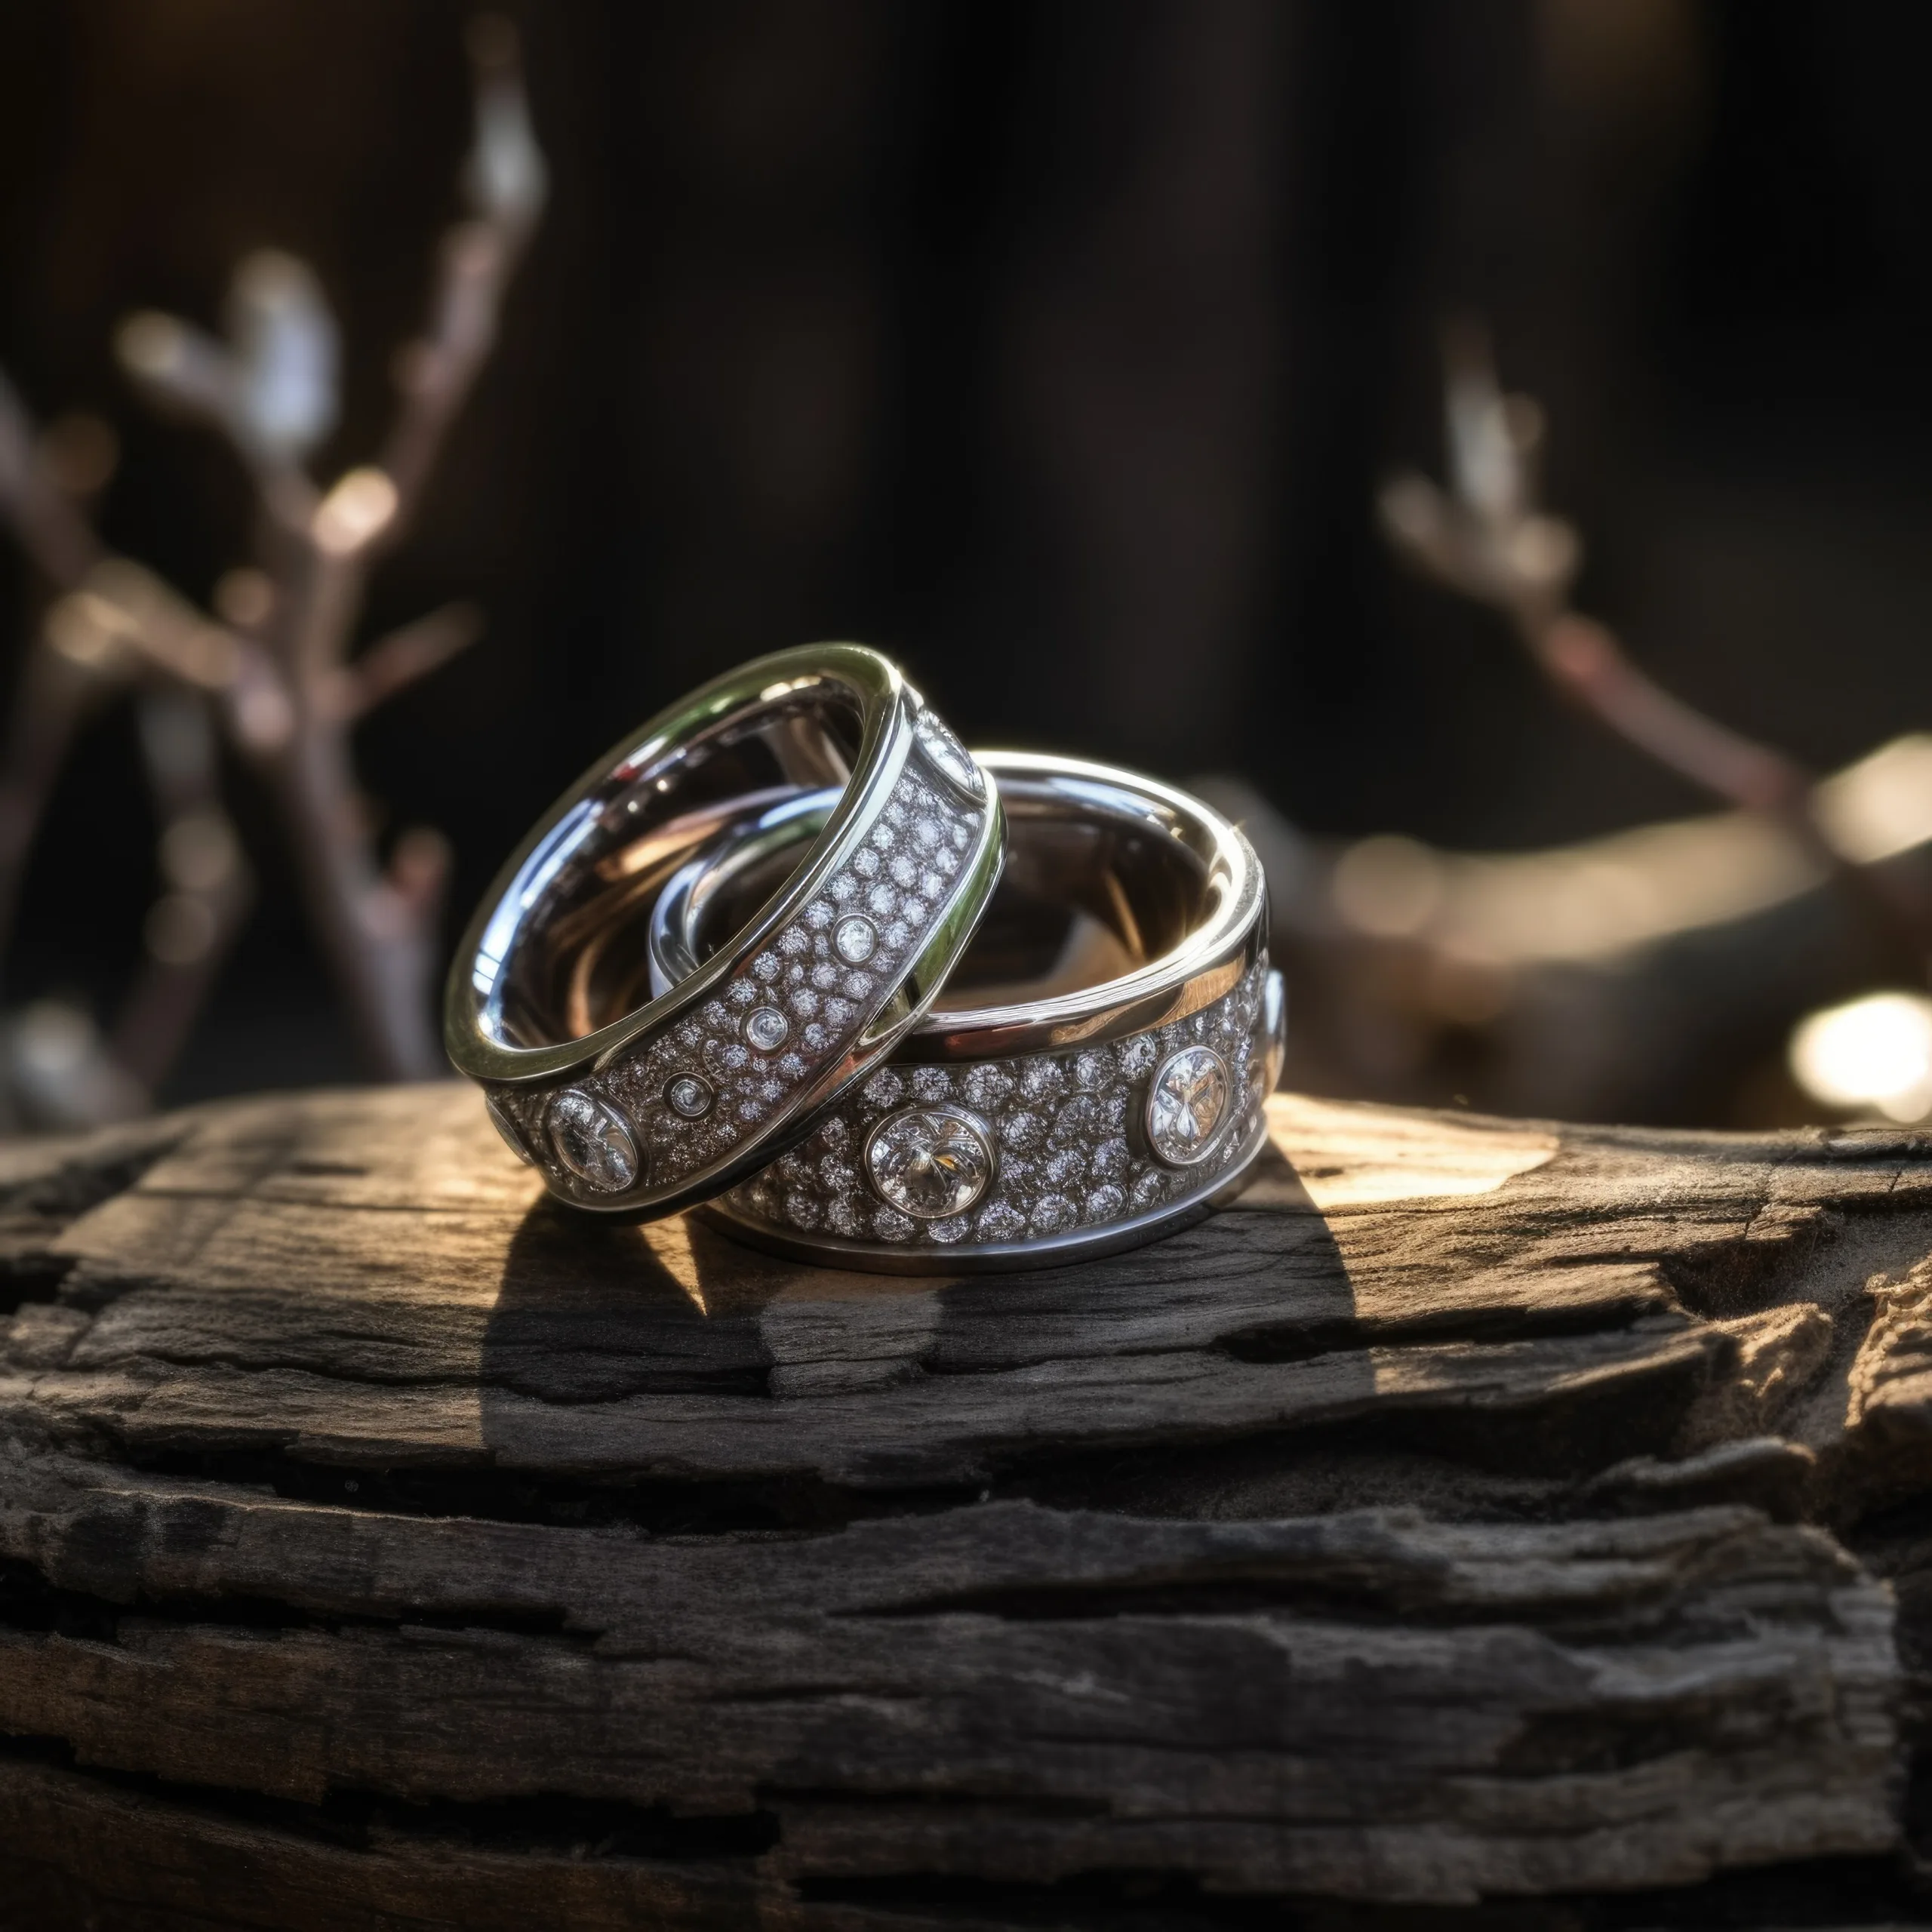 Safe for the wedding rings: a couple of rings sitting on top of a piece of wood.